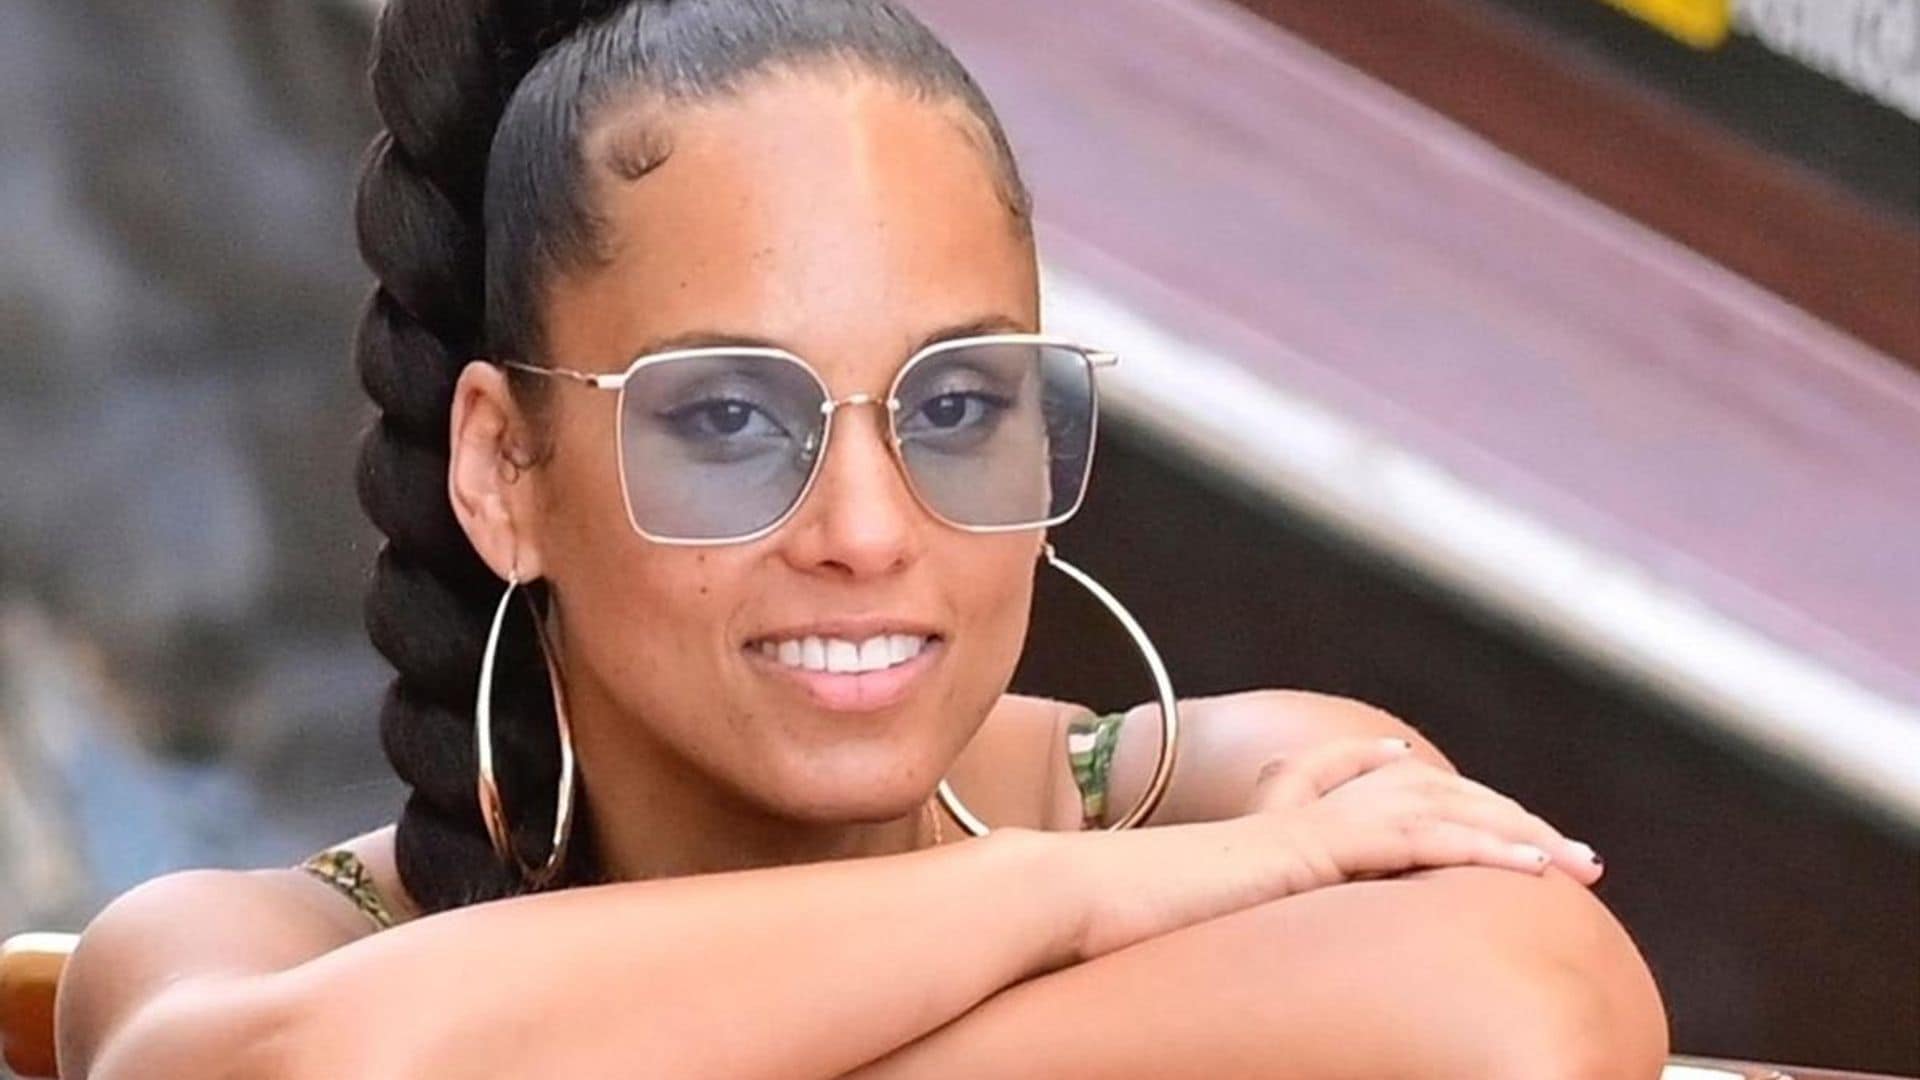 singer-songwriter Alicia Keys is seen during her vacation in Venice